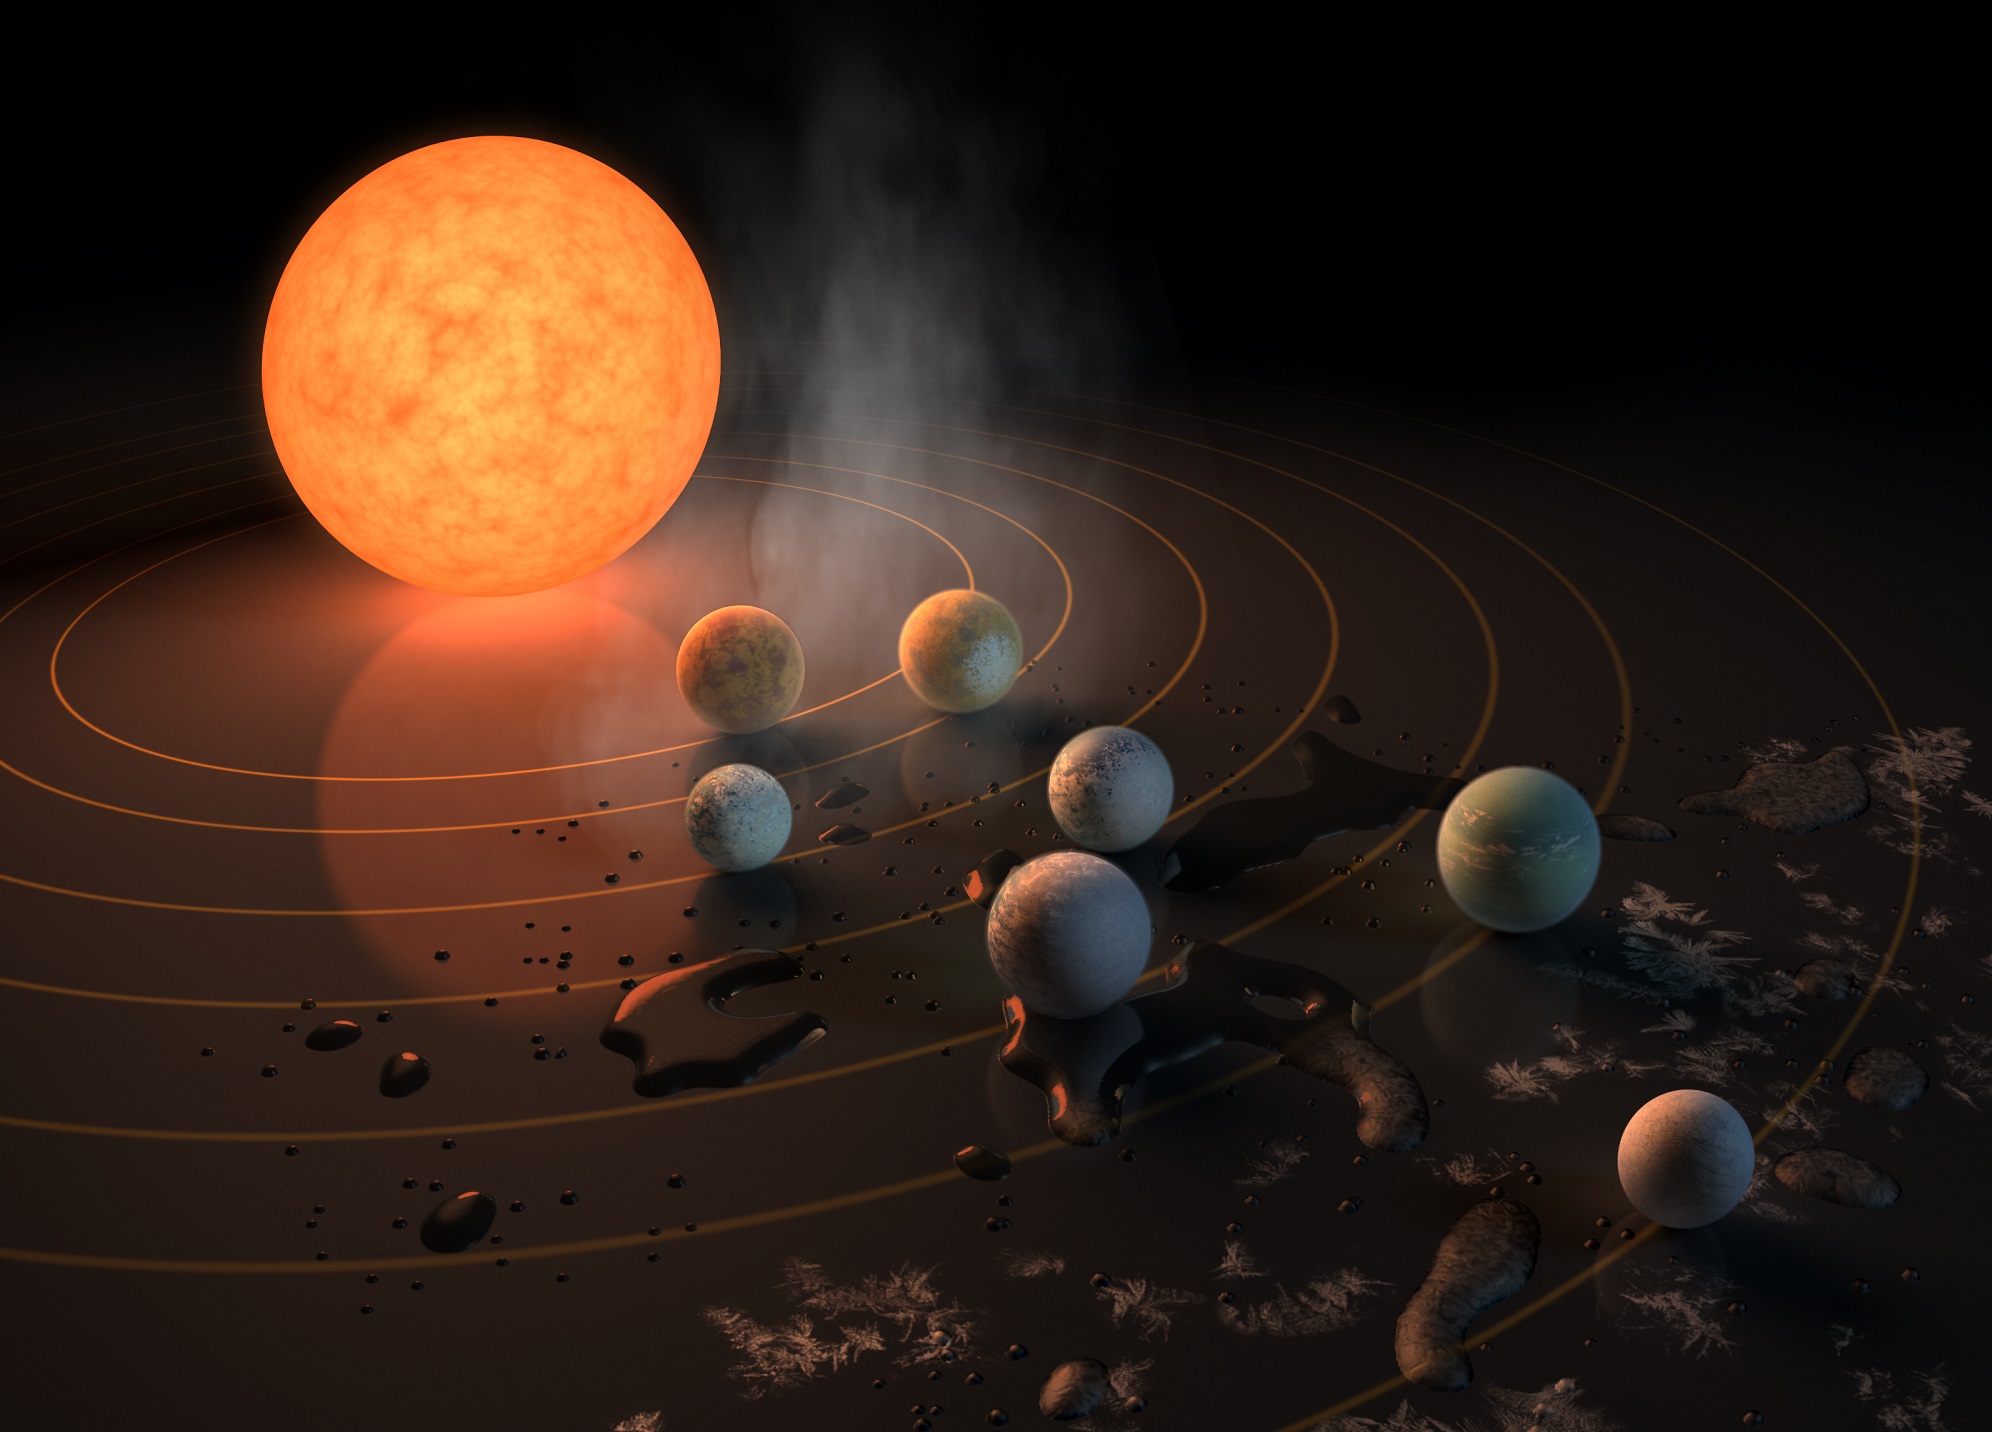 Artist's concept of the TRAPPIST-1 star system, an ultra-cool dwarf that has seven Earth-size planets orbiting it. We're going to keep finding more and more solar systemsl like this, but we need observatories like WFIRST, with starshades, to understand the planets better. Credits: NASA/JPL-Caltech